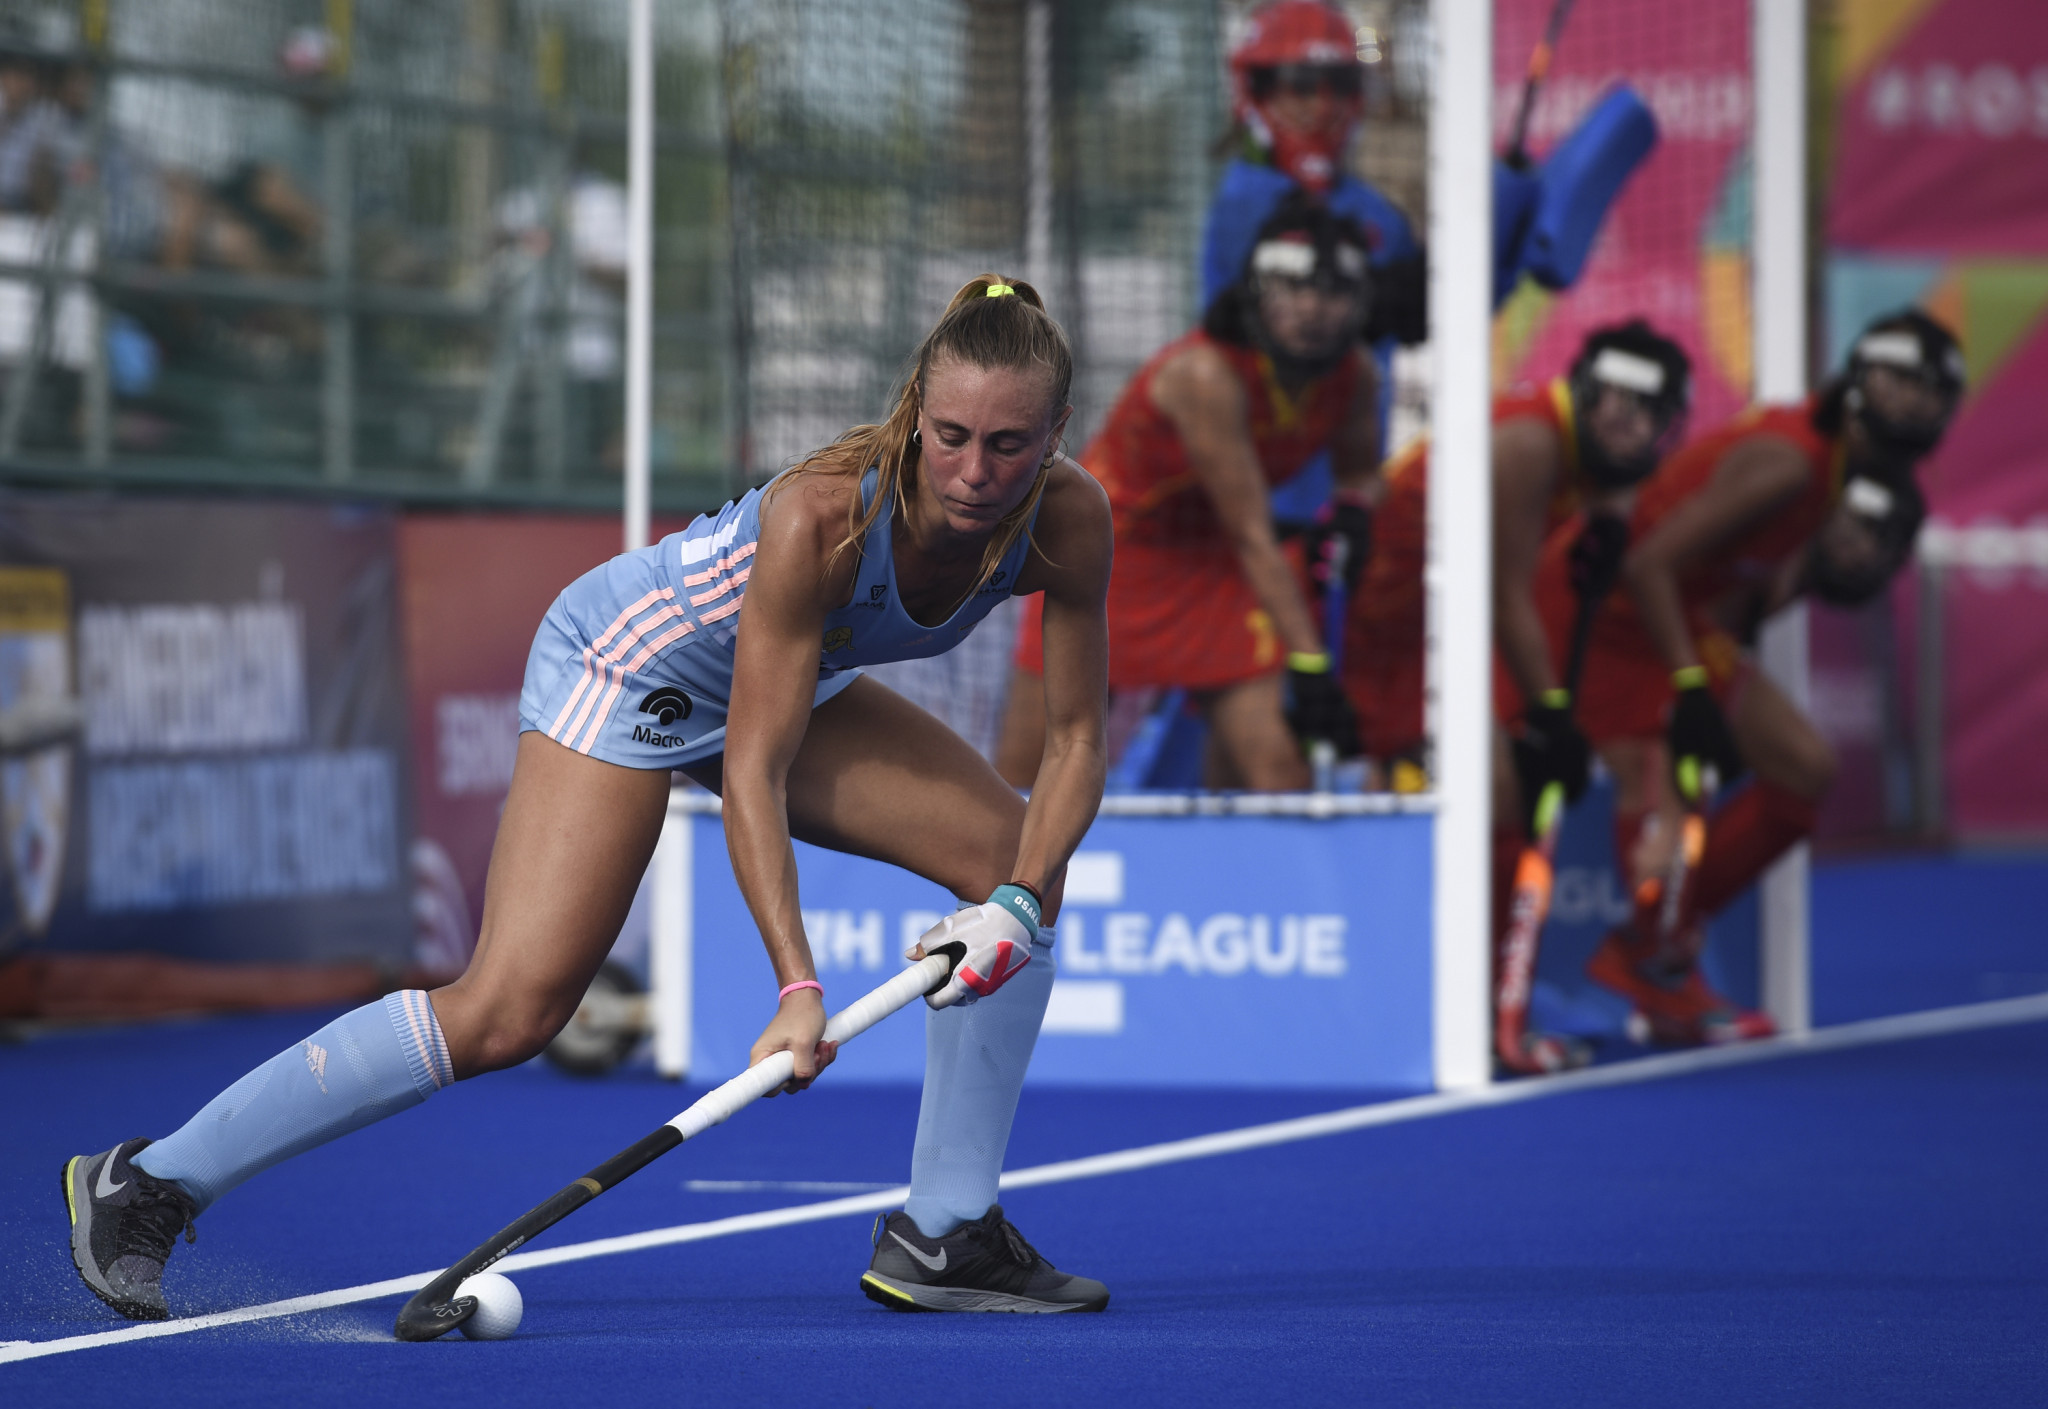 Argentina delight home crowd with success in FIH Pro League